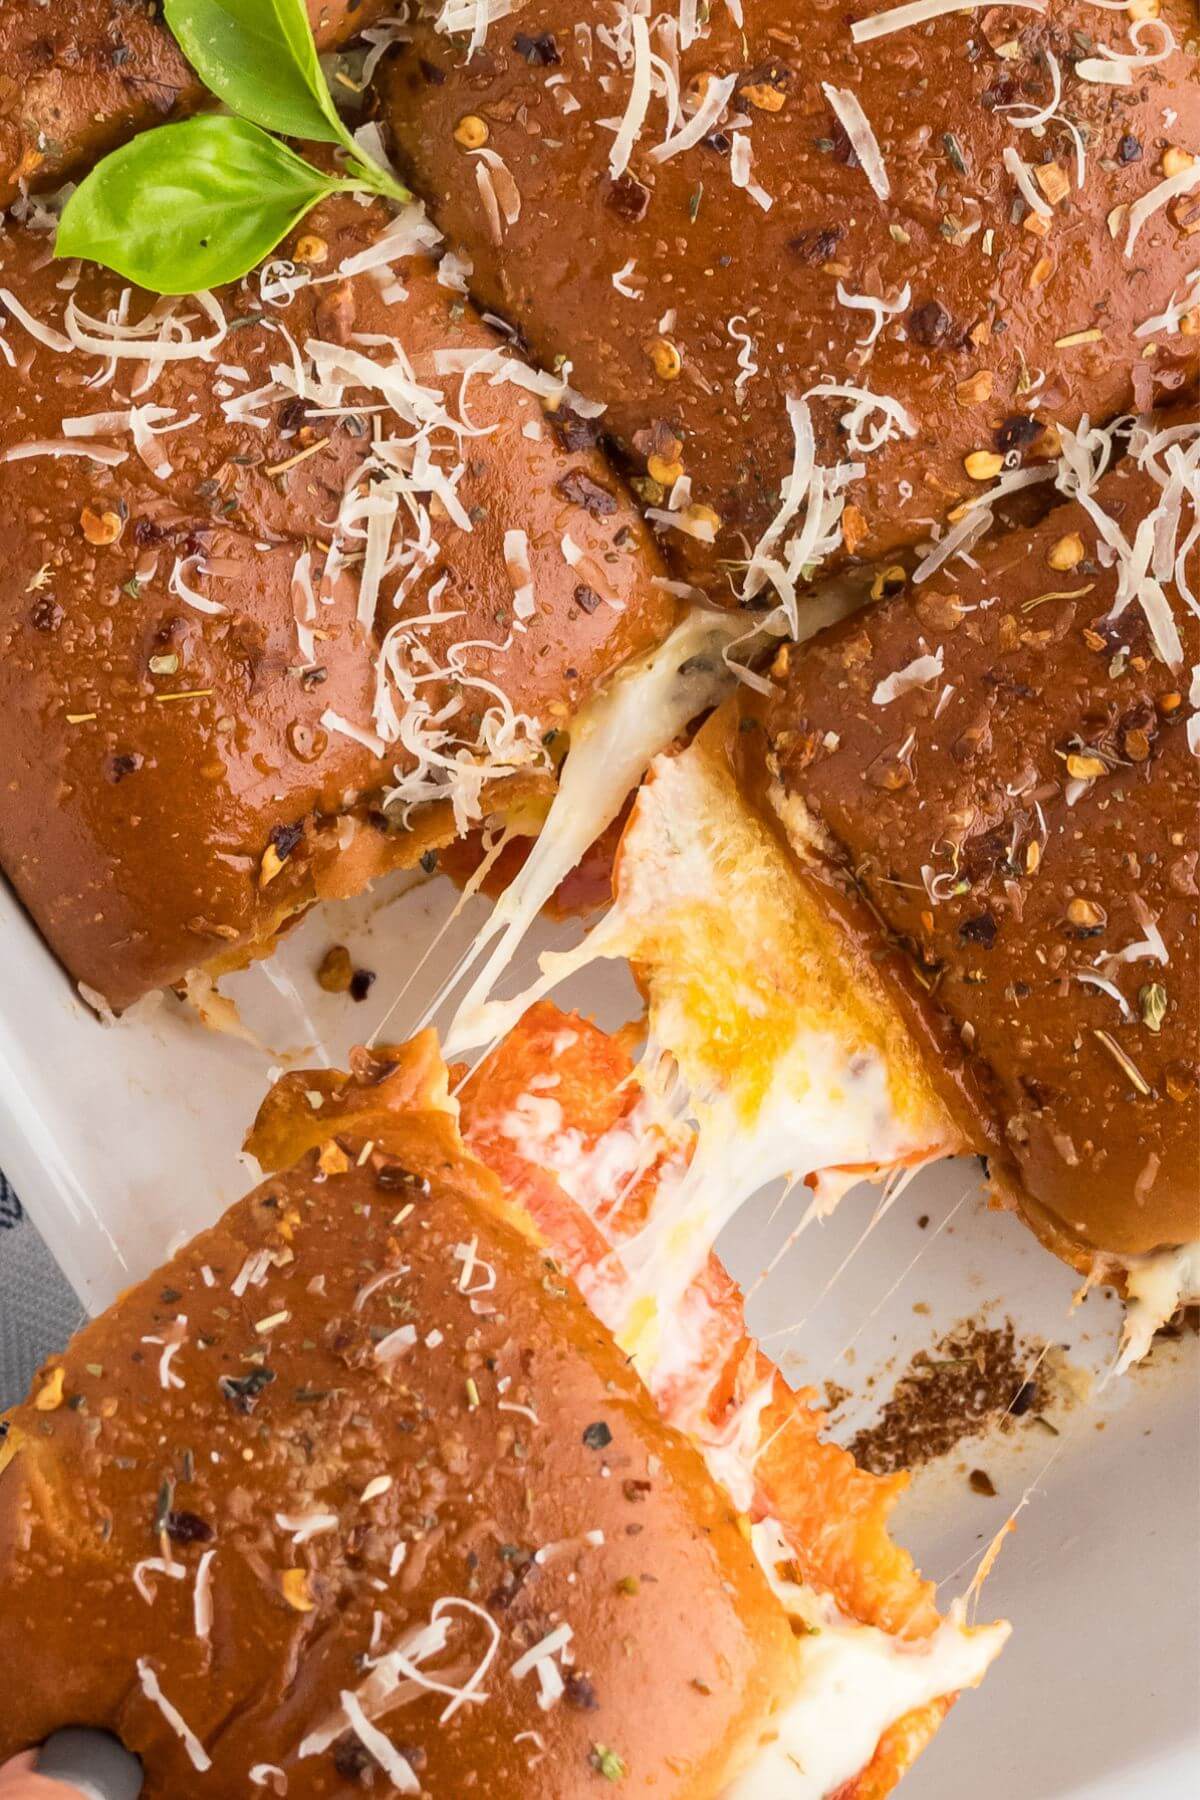 Stretchy cheese on gooey pizza slider recipe.